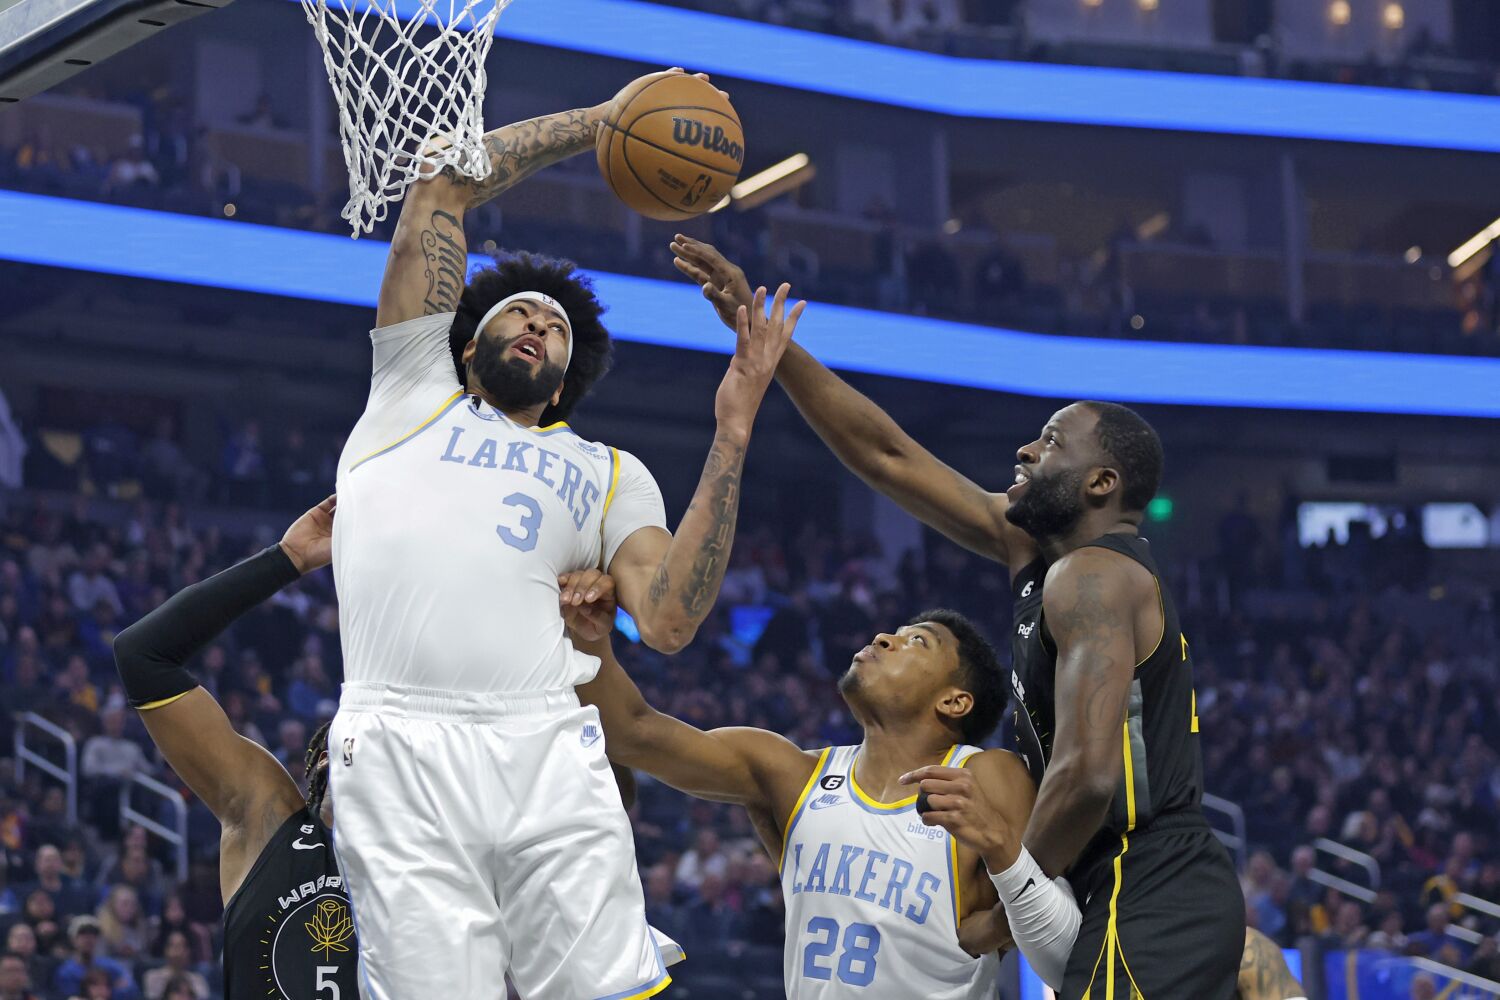 LeBron-less Lakers show off their new additions, newfound grit in win over Warriors